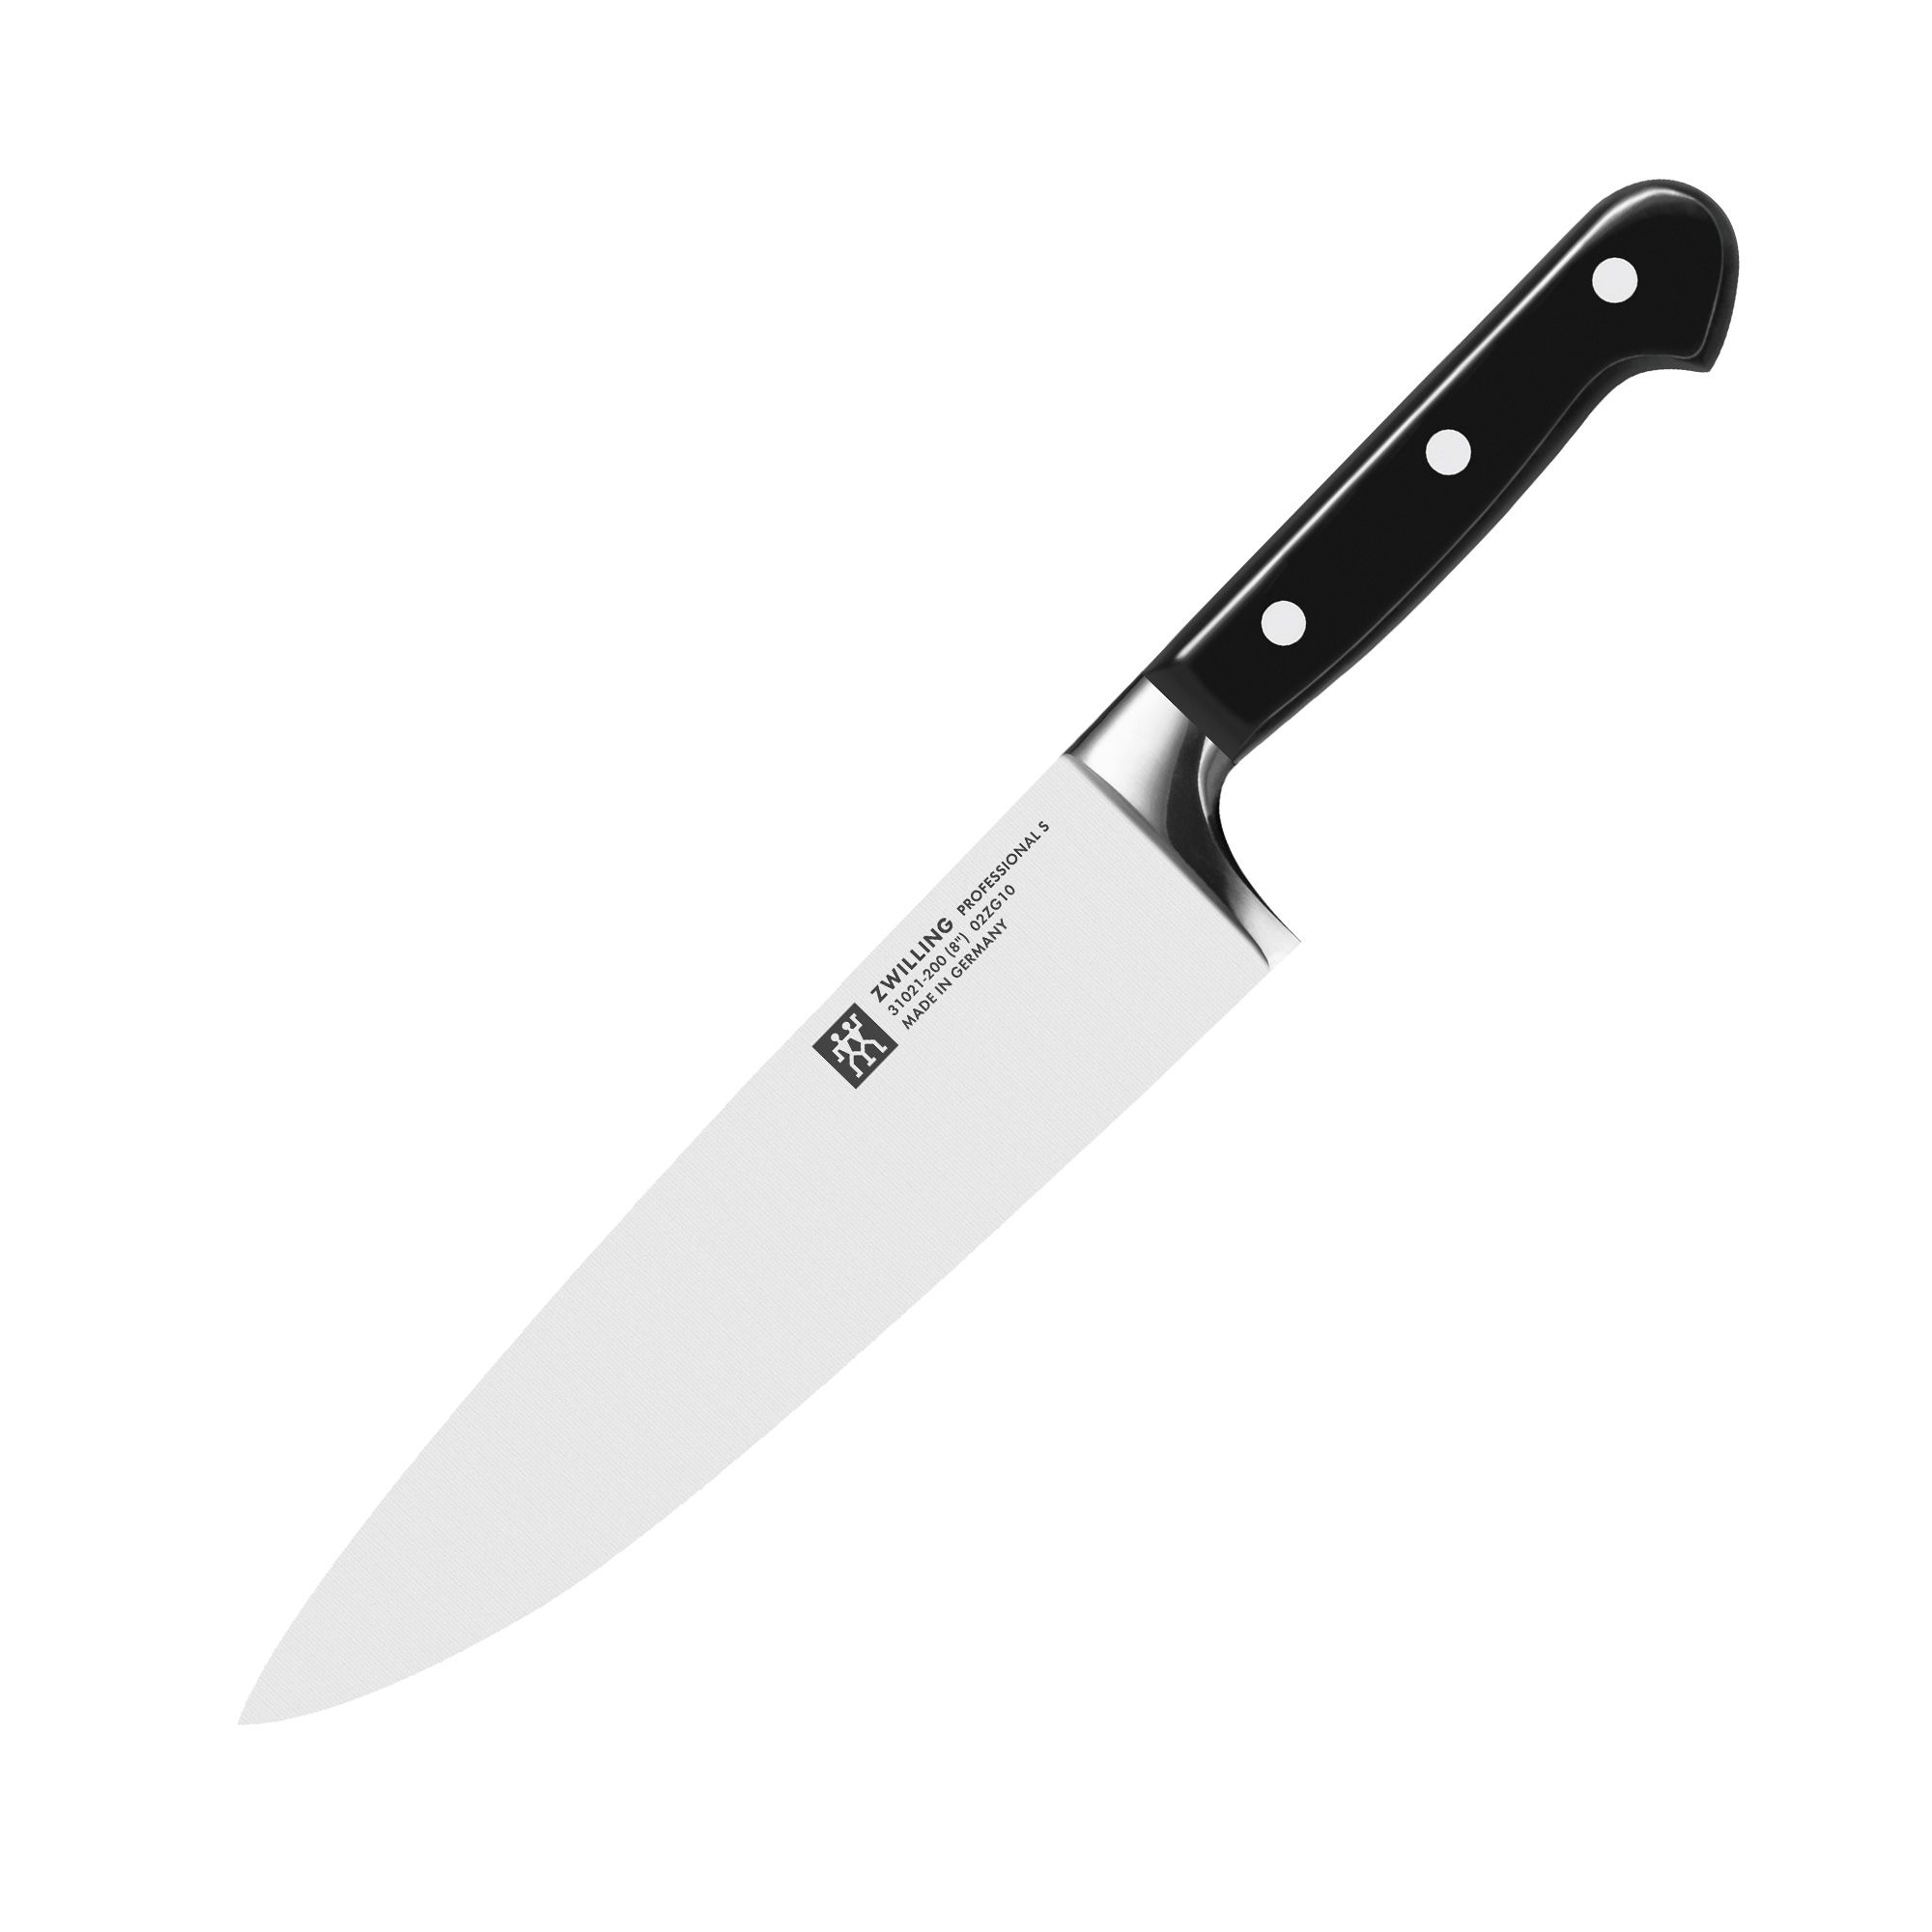 Zwilling - Professional S - Carving knife  - 20 cm